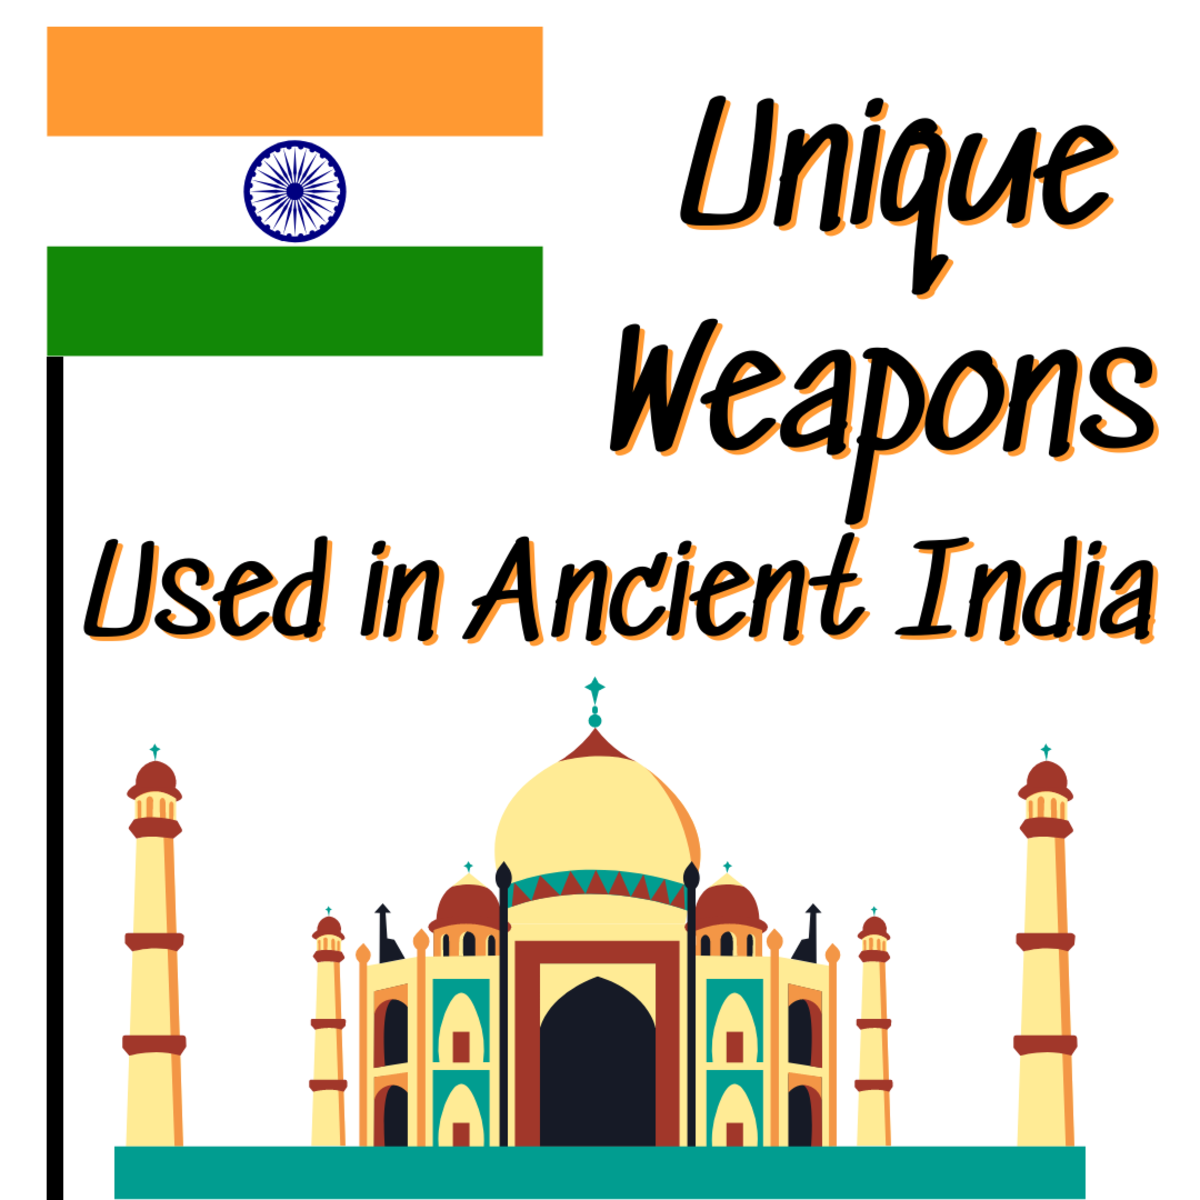 Read on to learn about 3 fascinating ancient Indian weapons.